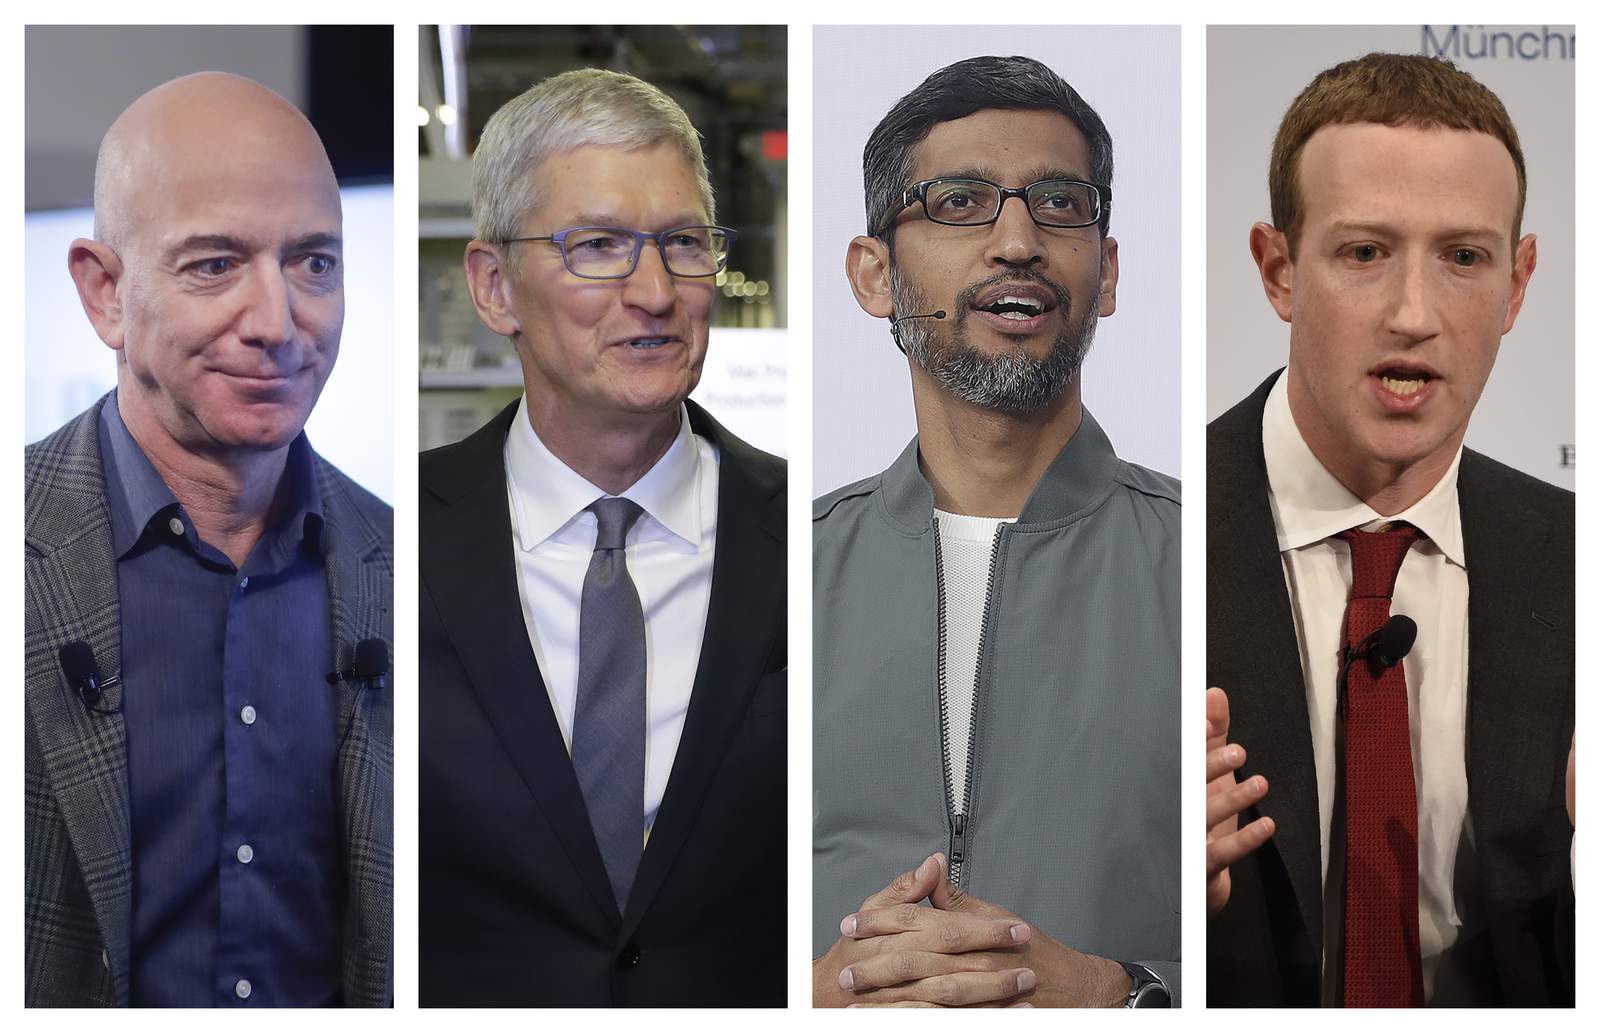 4 Big Tech CEOs getting heat from Congress on competition